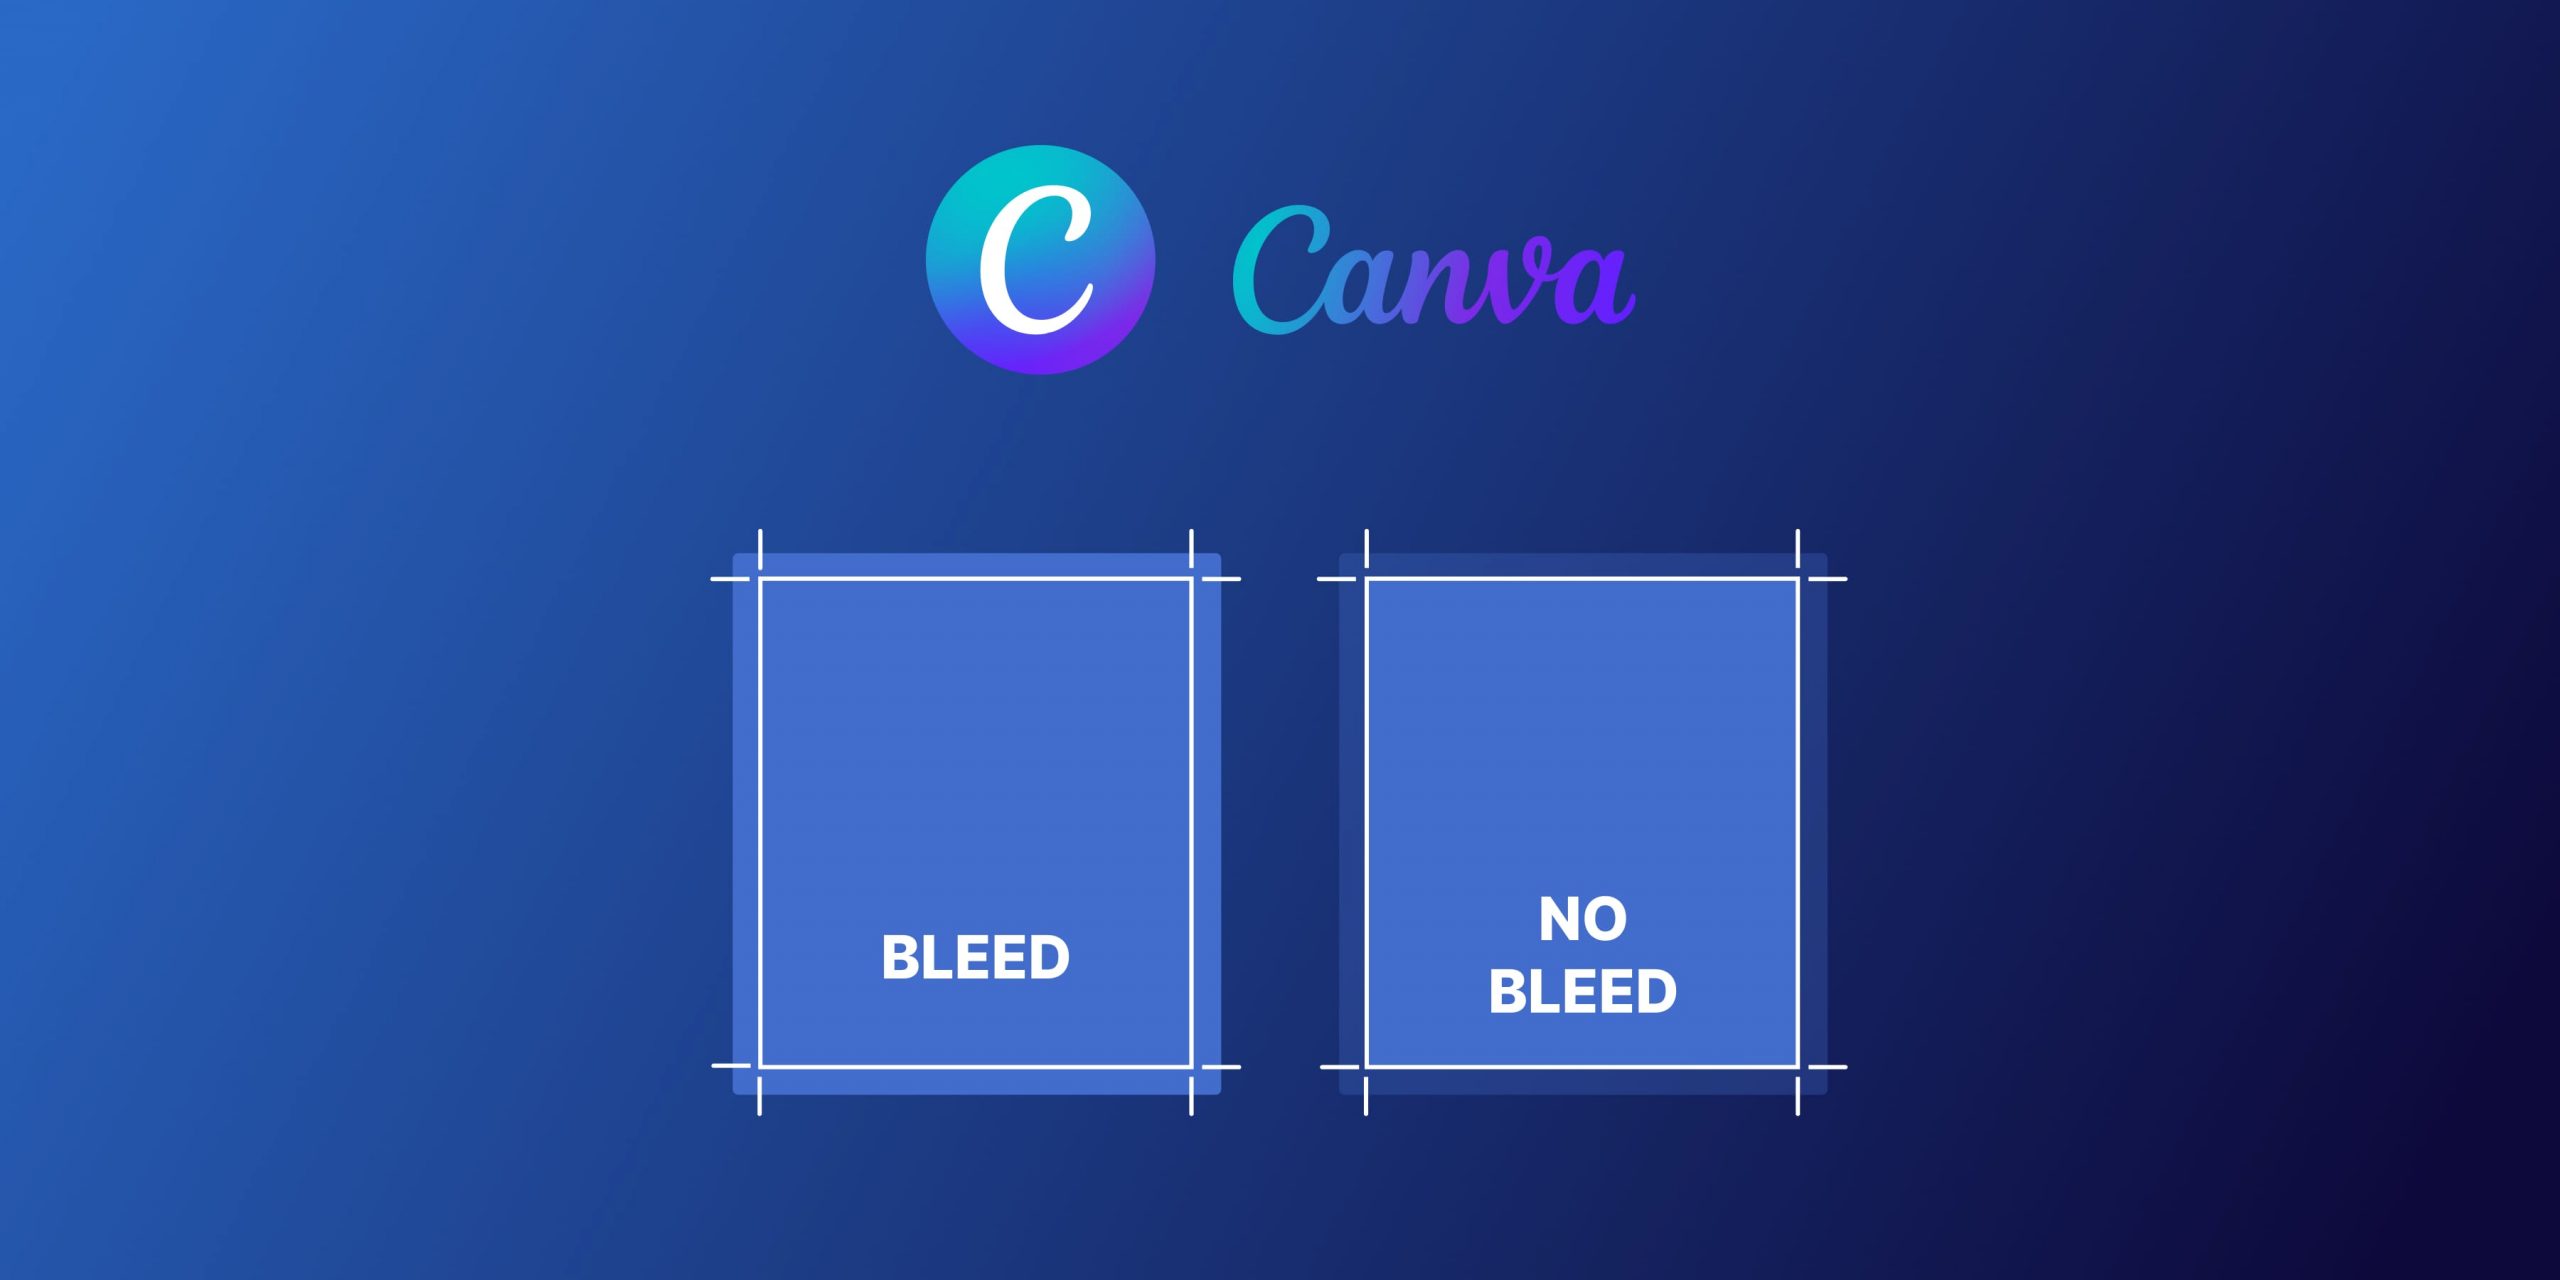 How to add a bleed in Canva?